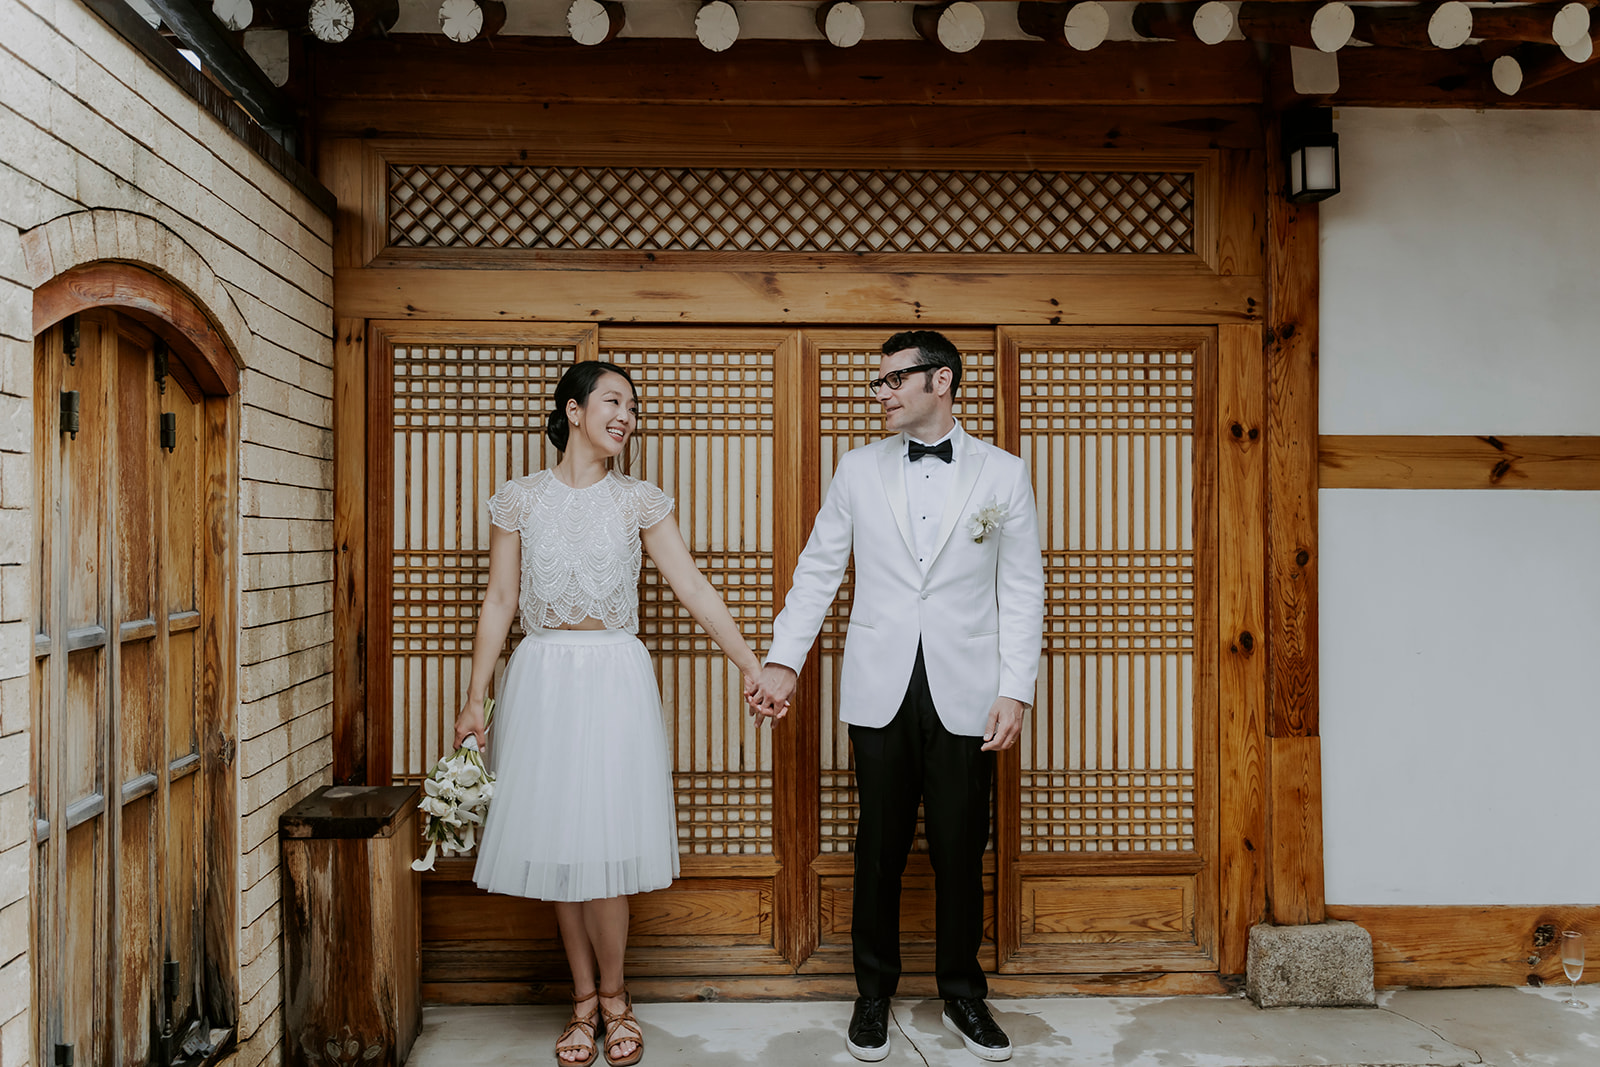 A hanok wedding ceremony with a bride and groom holding hands in front of a traditional wooden door.